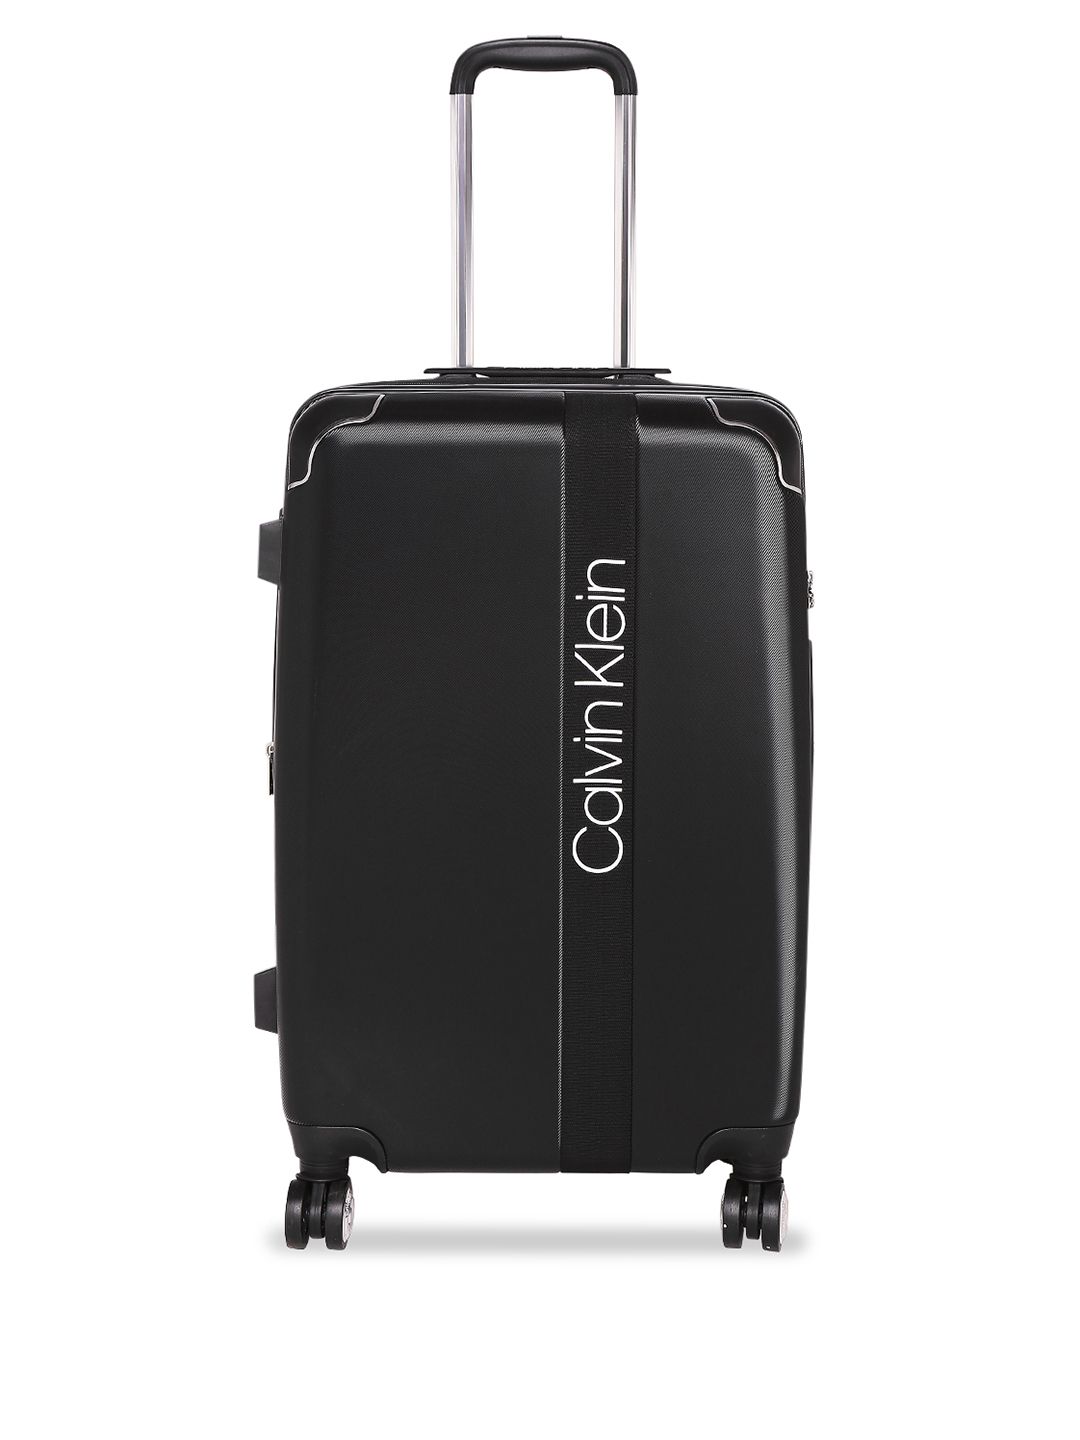 Calvin Klein Black Solid Madison Ave HS Hard-Sided Medium Trolley Suitcase Price in India